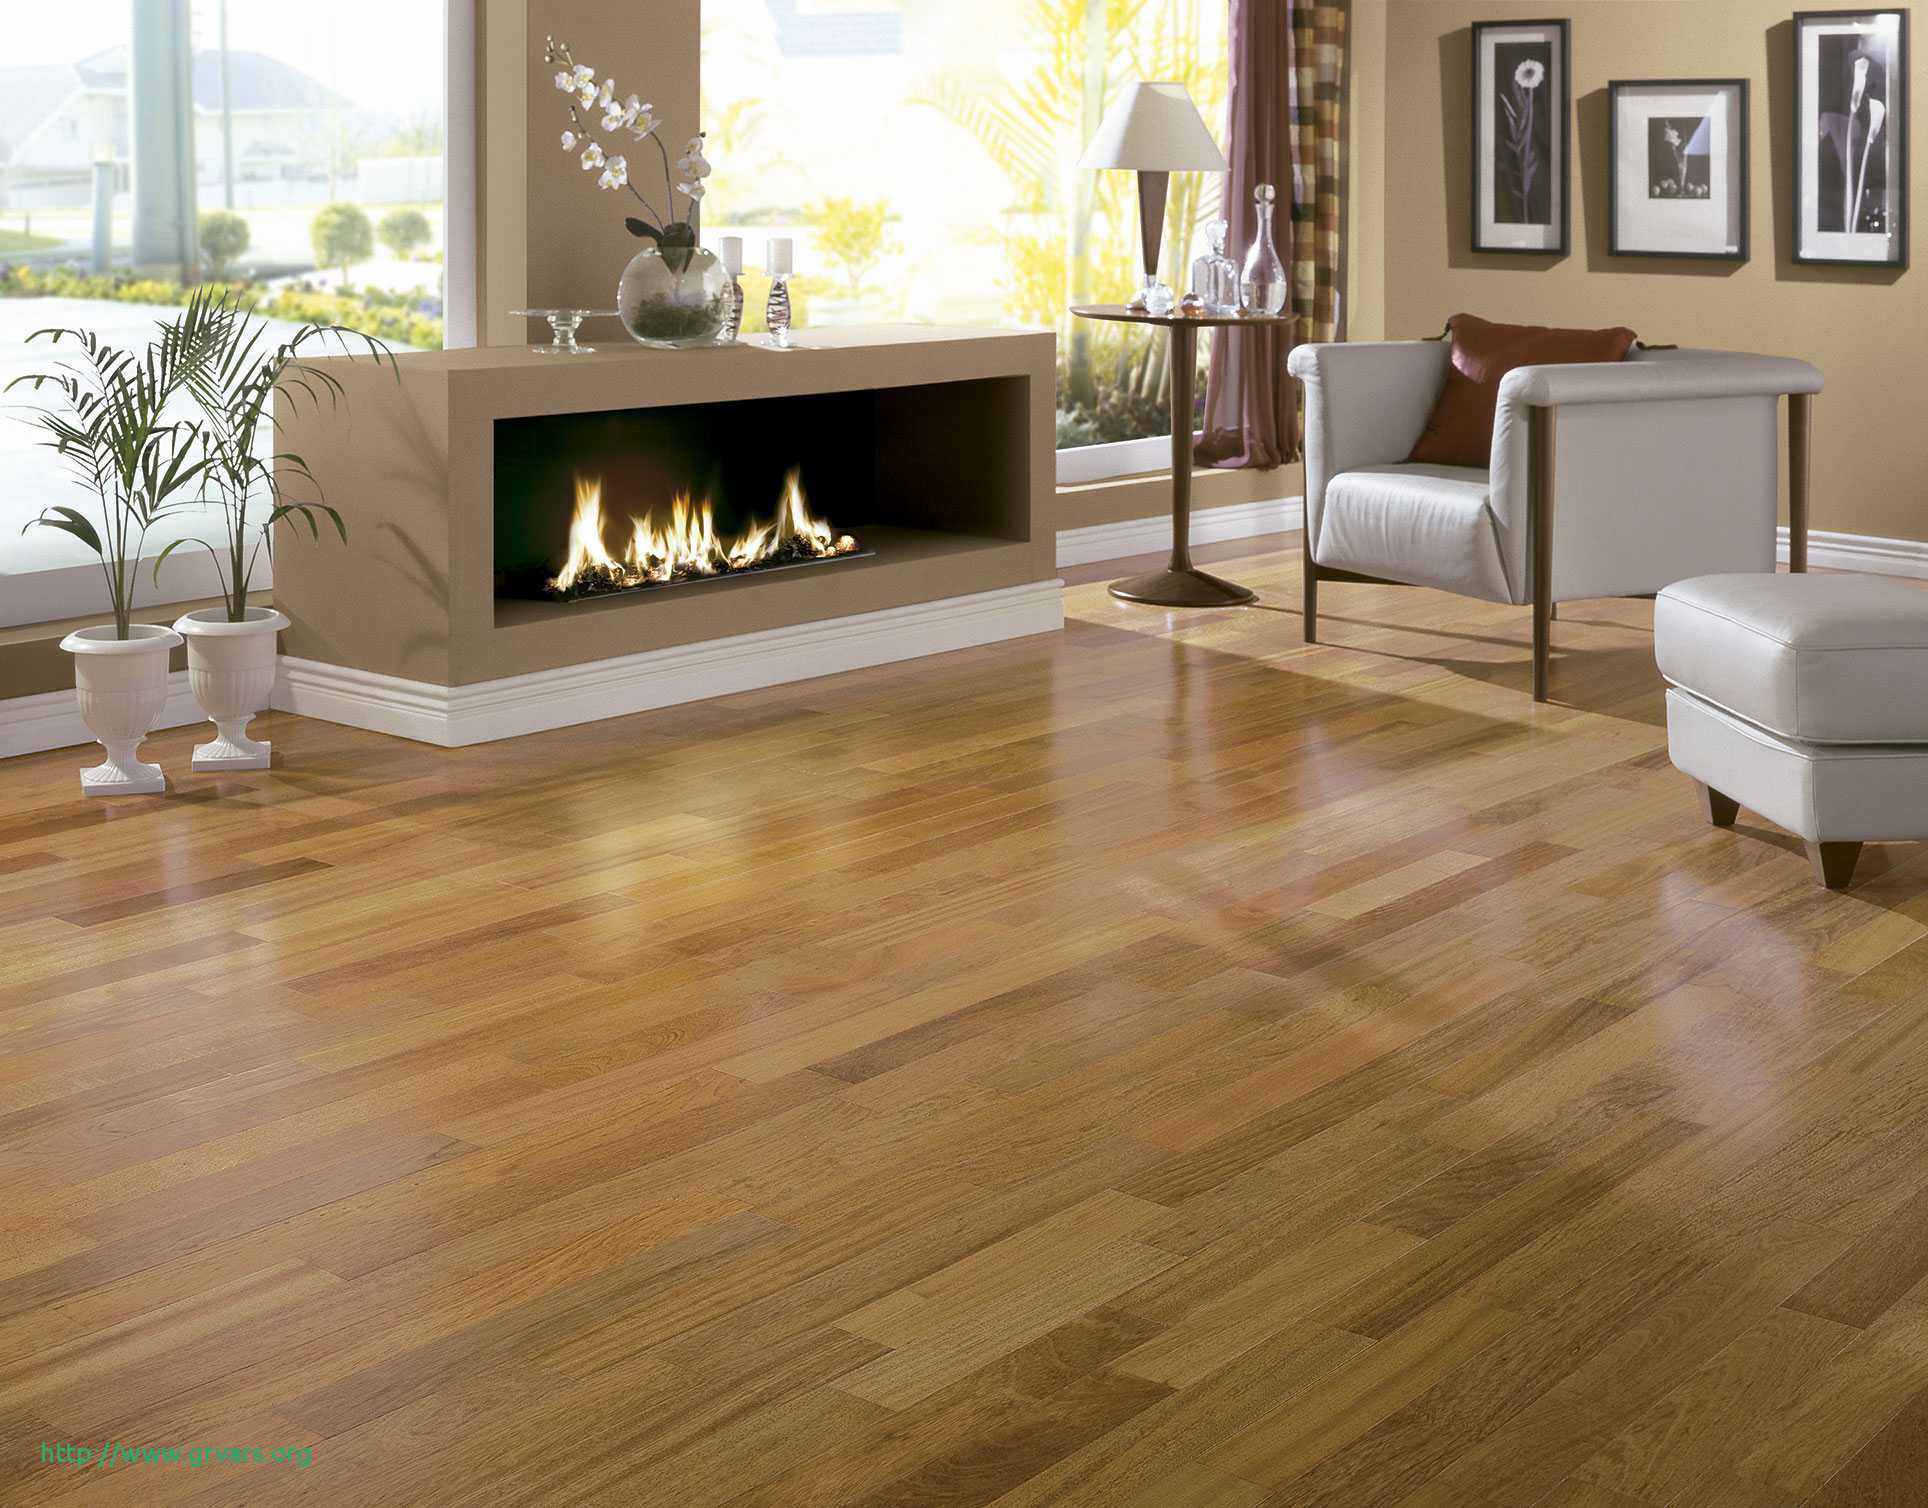 18 Nice Hardwood Floor Cleaning Nashville Tn 2024 free download hardwood floor cleaning nashville tn of floor cleaning nashville tn impressionnant breathtaking discount throughout floor cleaning nashville tn impressionnant breathtaking discount hardwood 